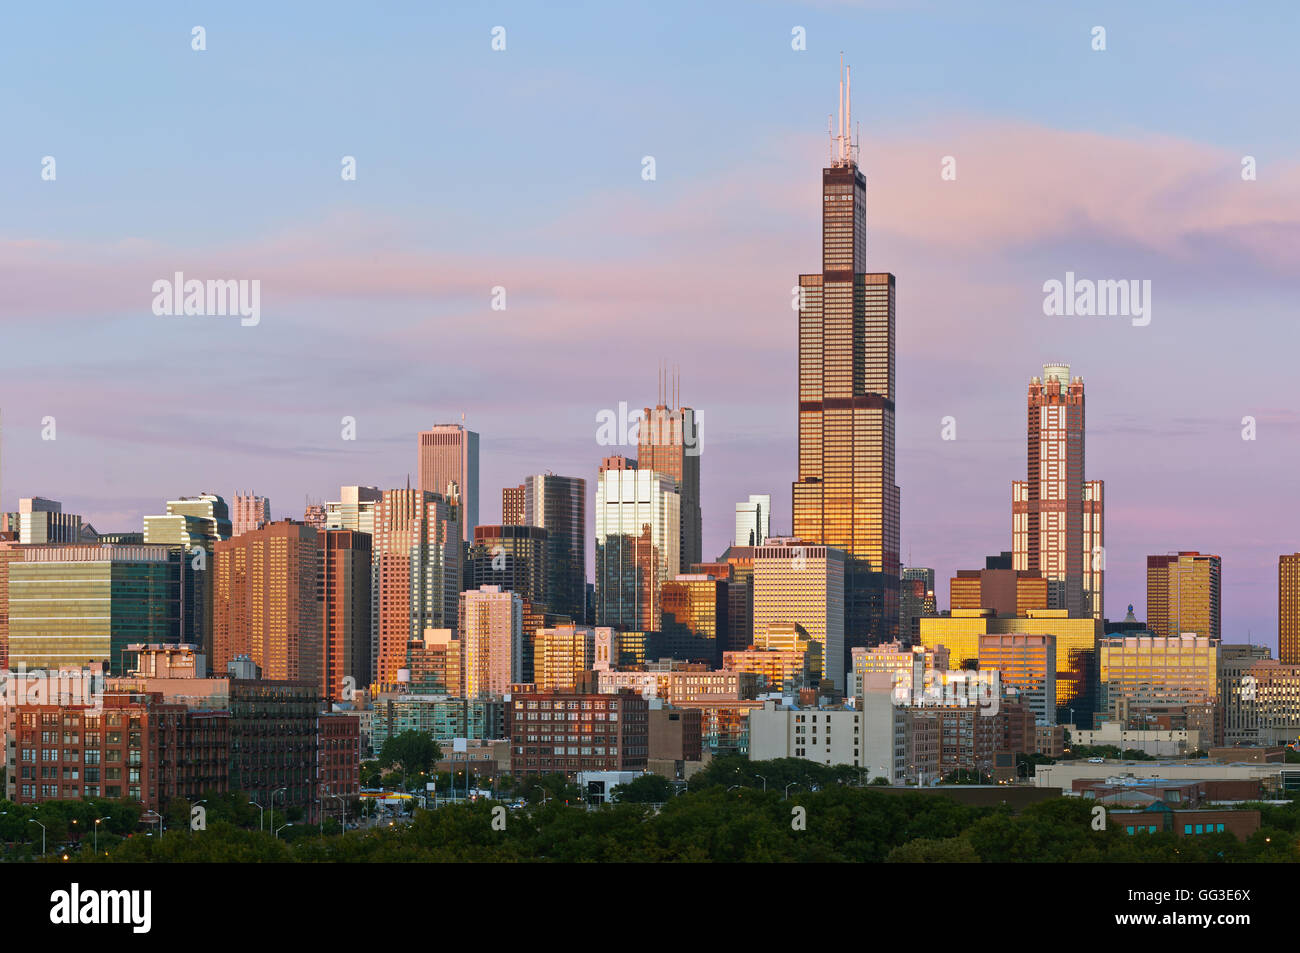 Chicago skyline at twilight. Image of Willis Tower and skyline of Chicago at sunset. Stock Photo